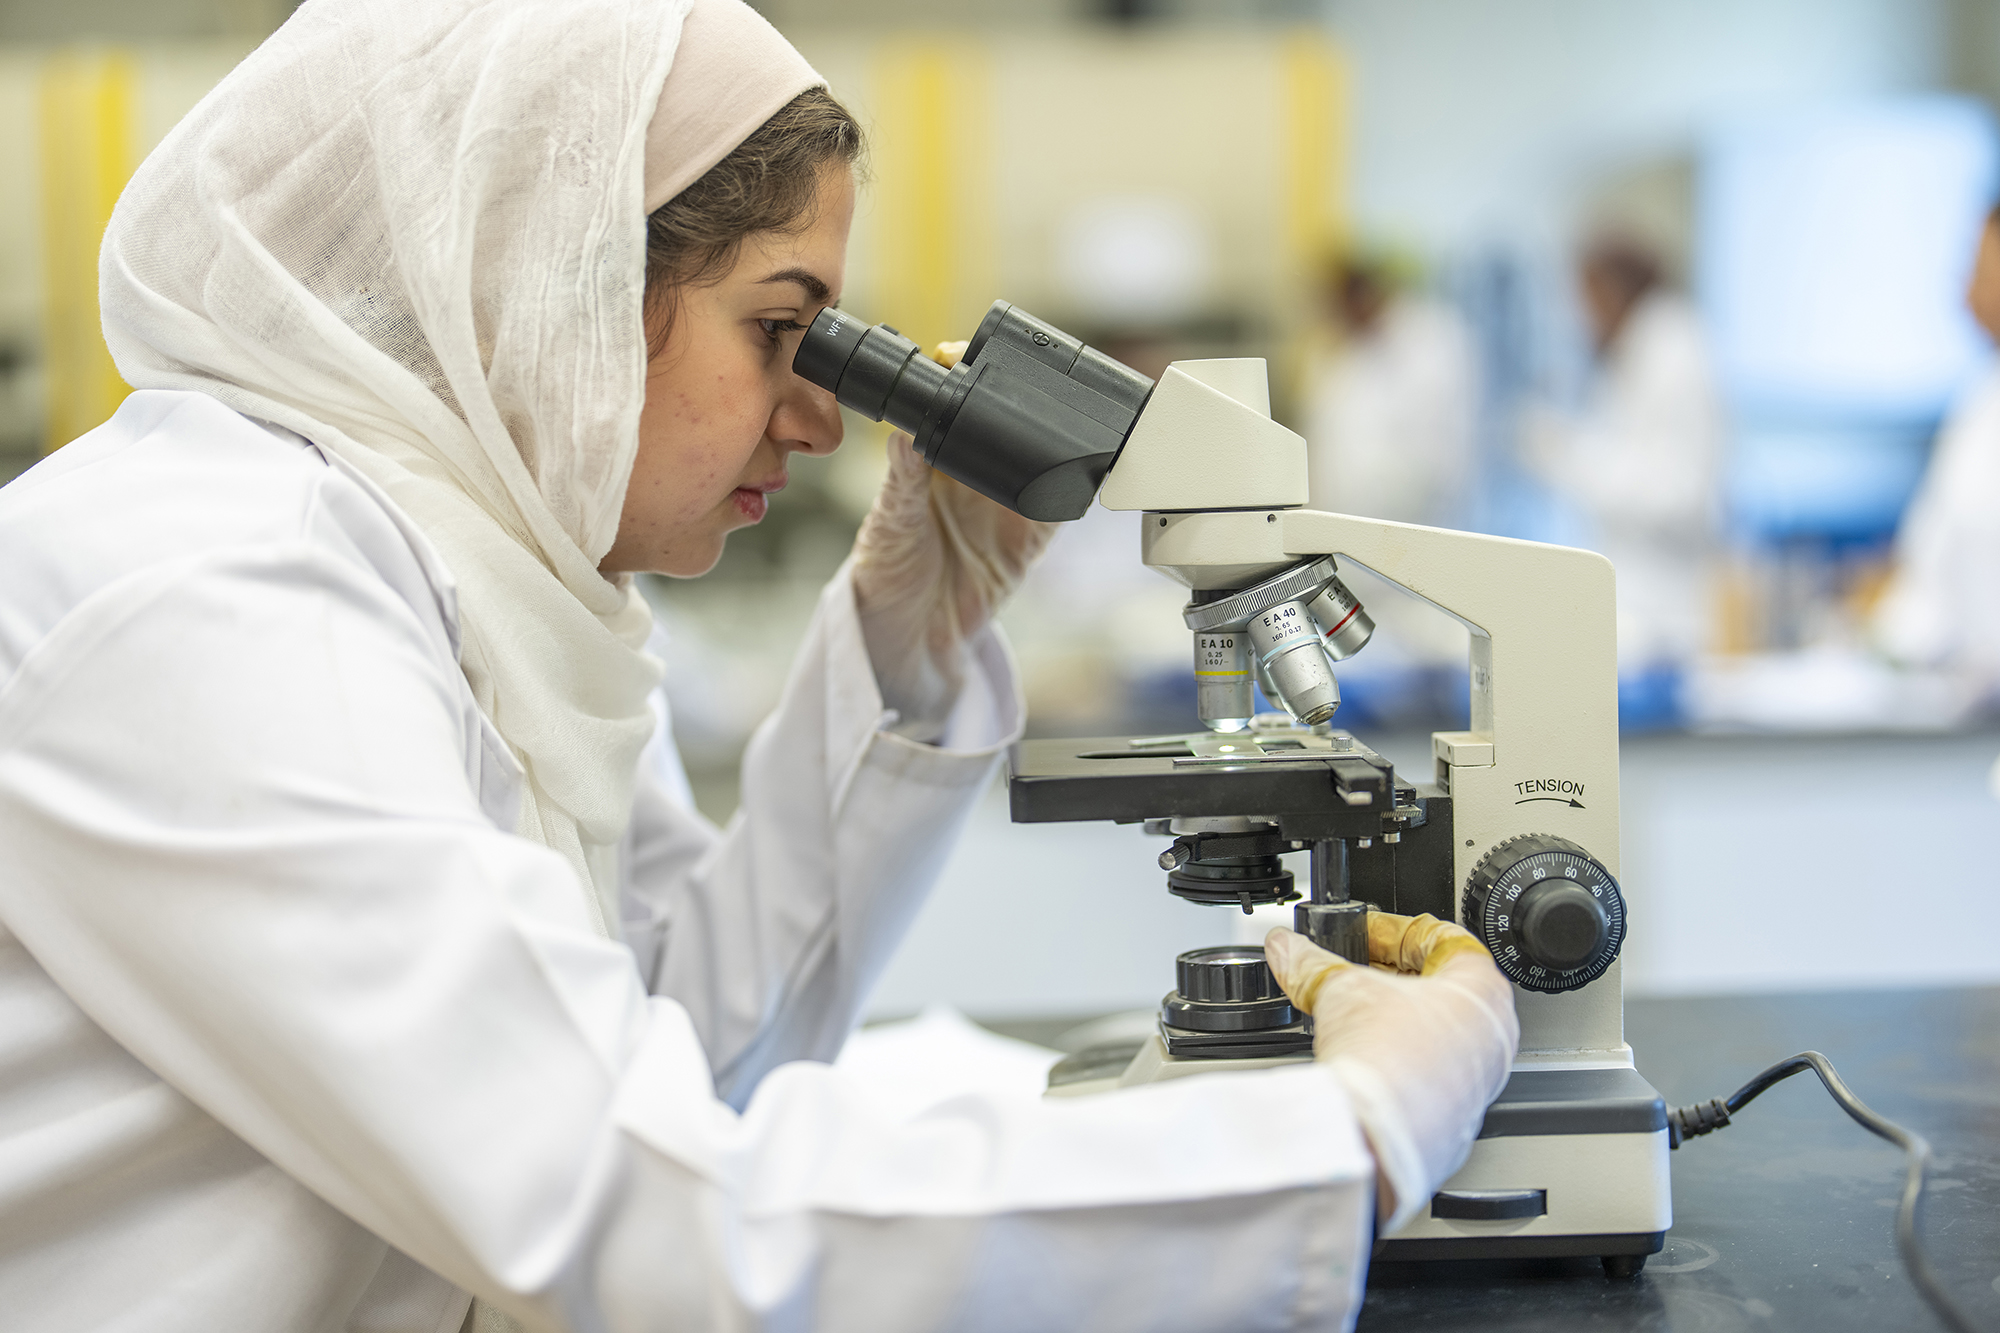 student working with microscope equipment in science lab wearing white coat